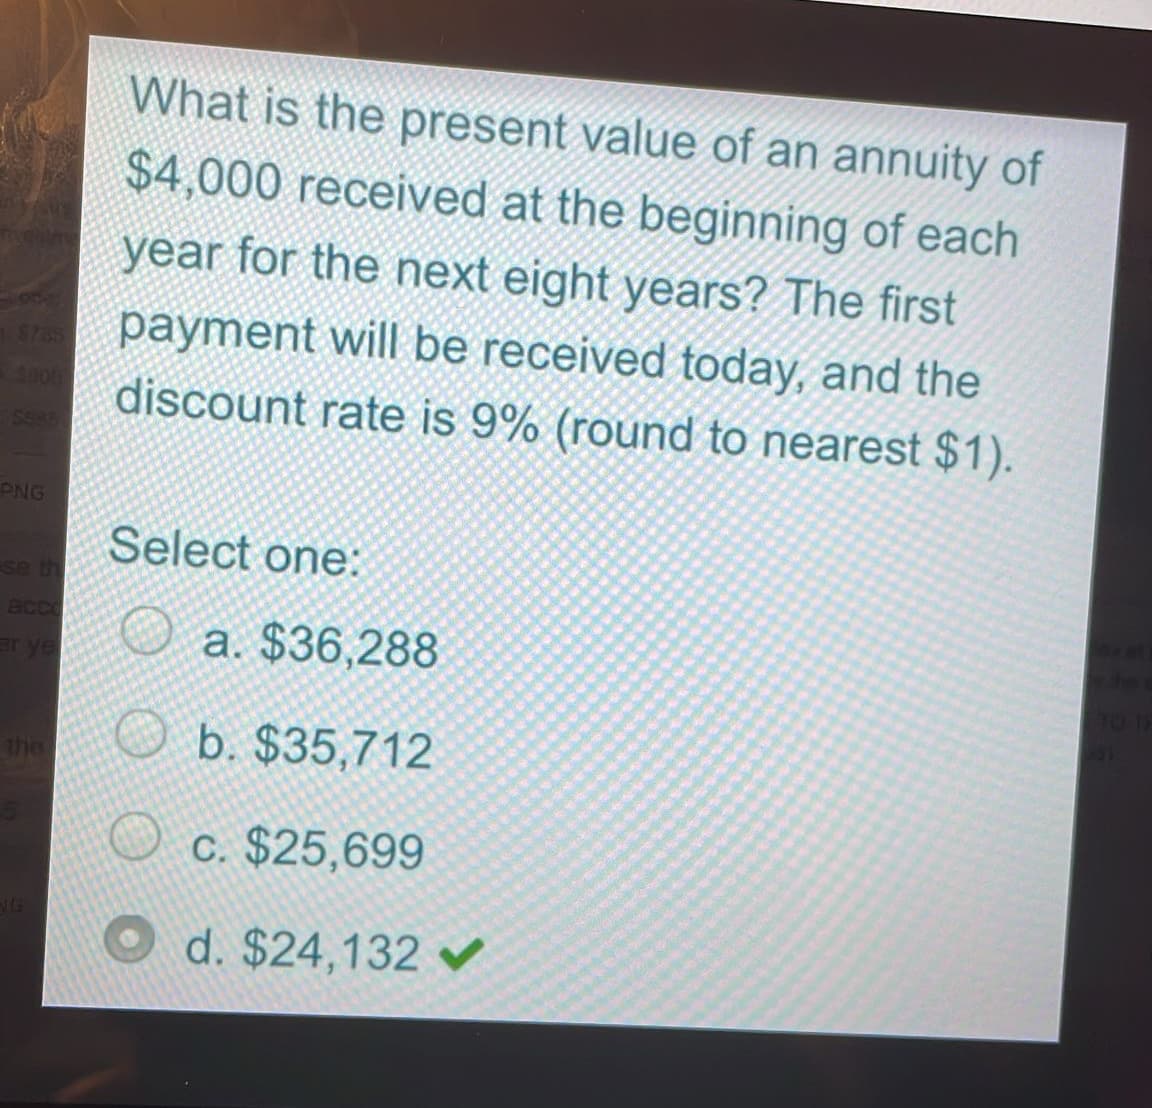 4900
$585
PNG
se th
er ye
the
What is the present value of an annuity of
$4,000 received at the beginning of each
year for the next eight years? The first
payment will be received today, and the
discount rate is 9% (round to nearest $1).
Select one:
a. $36,288
b. $35,712
c. $25,699
d. $24,132 ✔